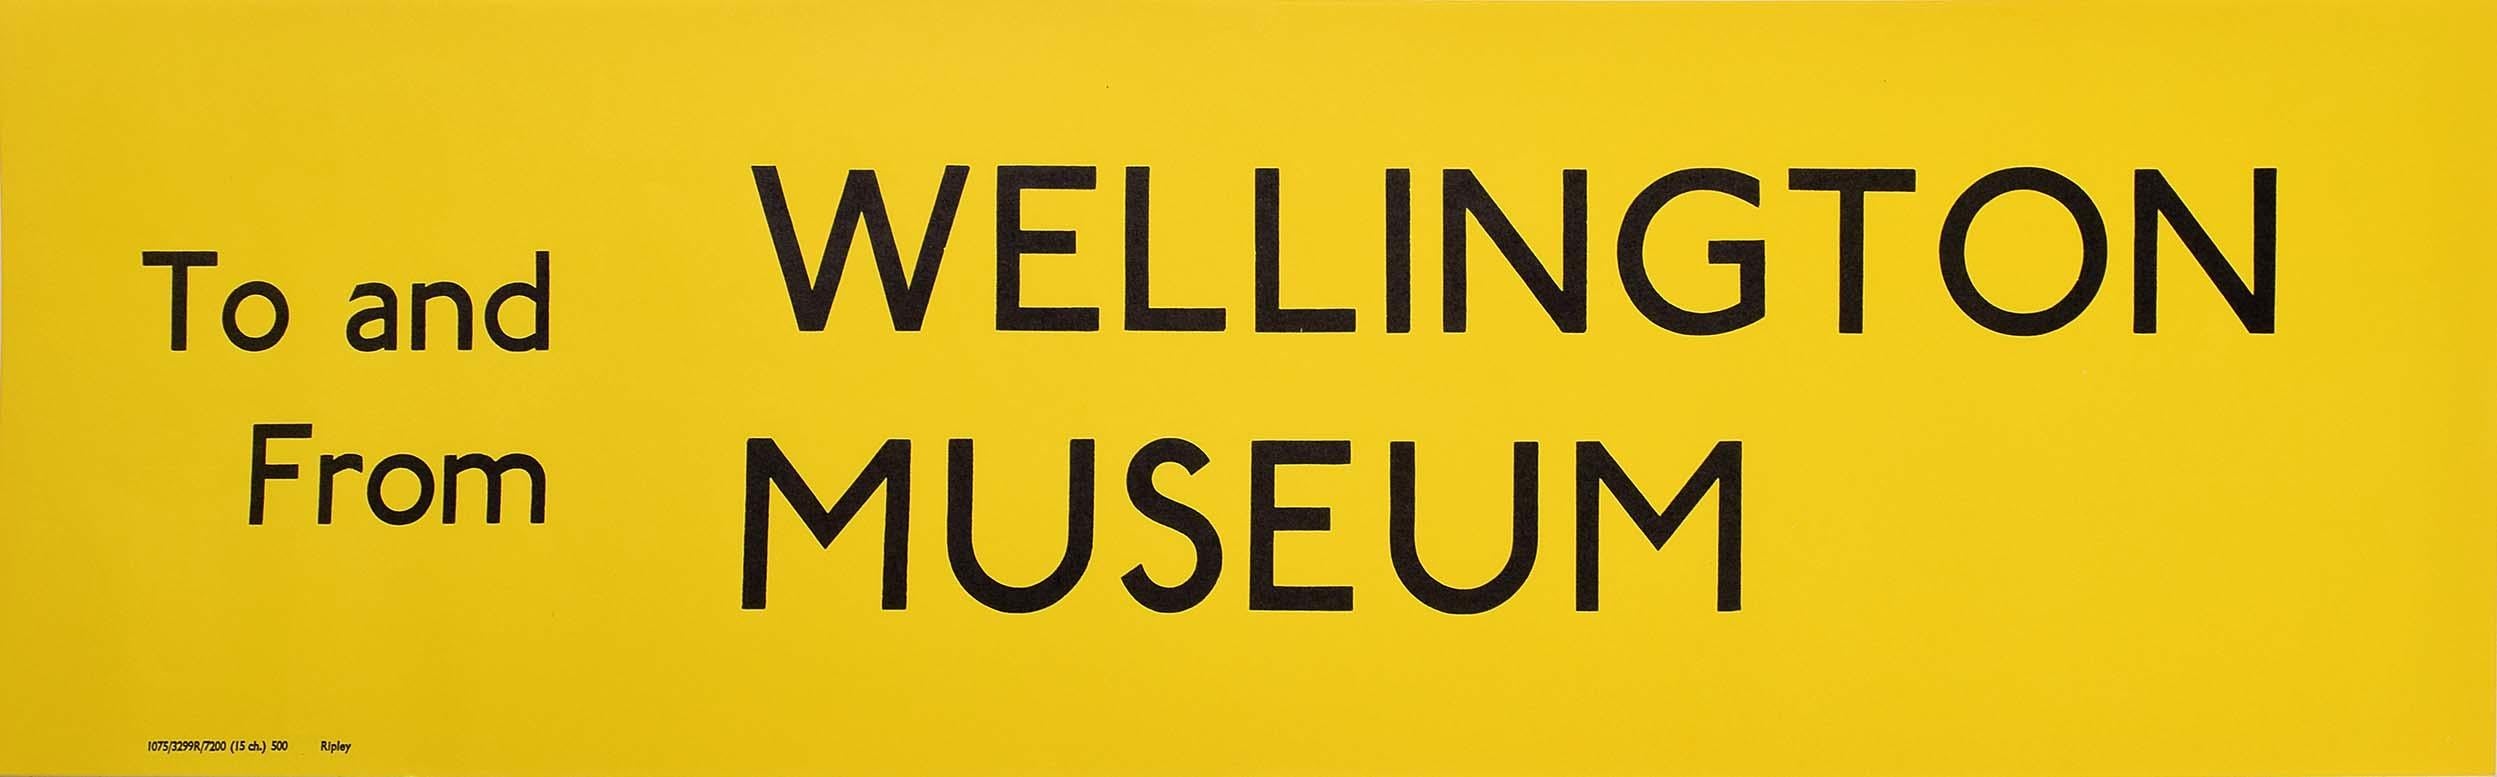 Apsley House Wellington Museum, London Routemaster Bus sign c. 1970 poster